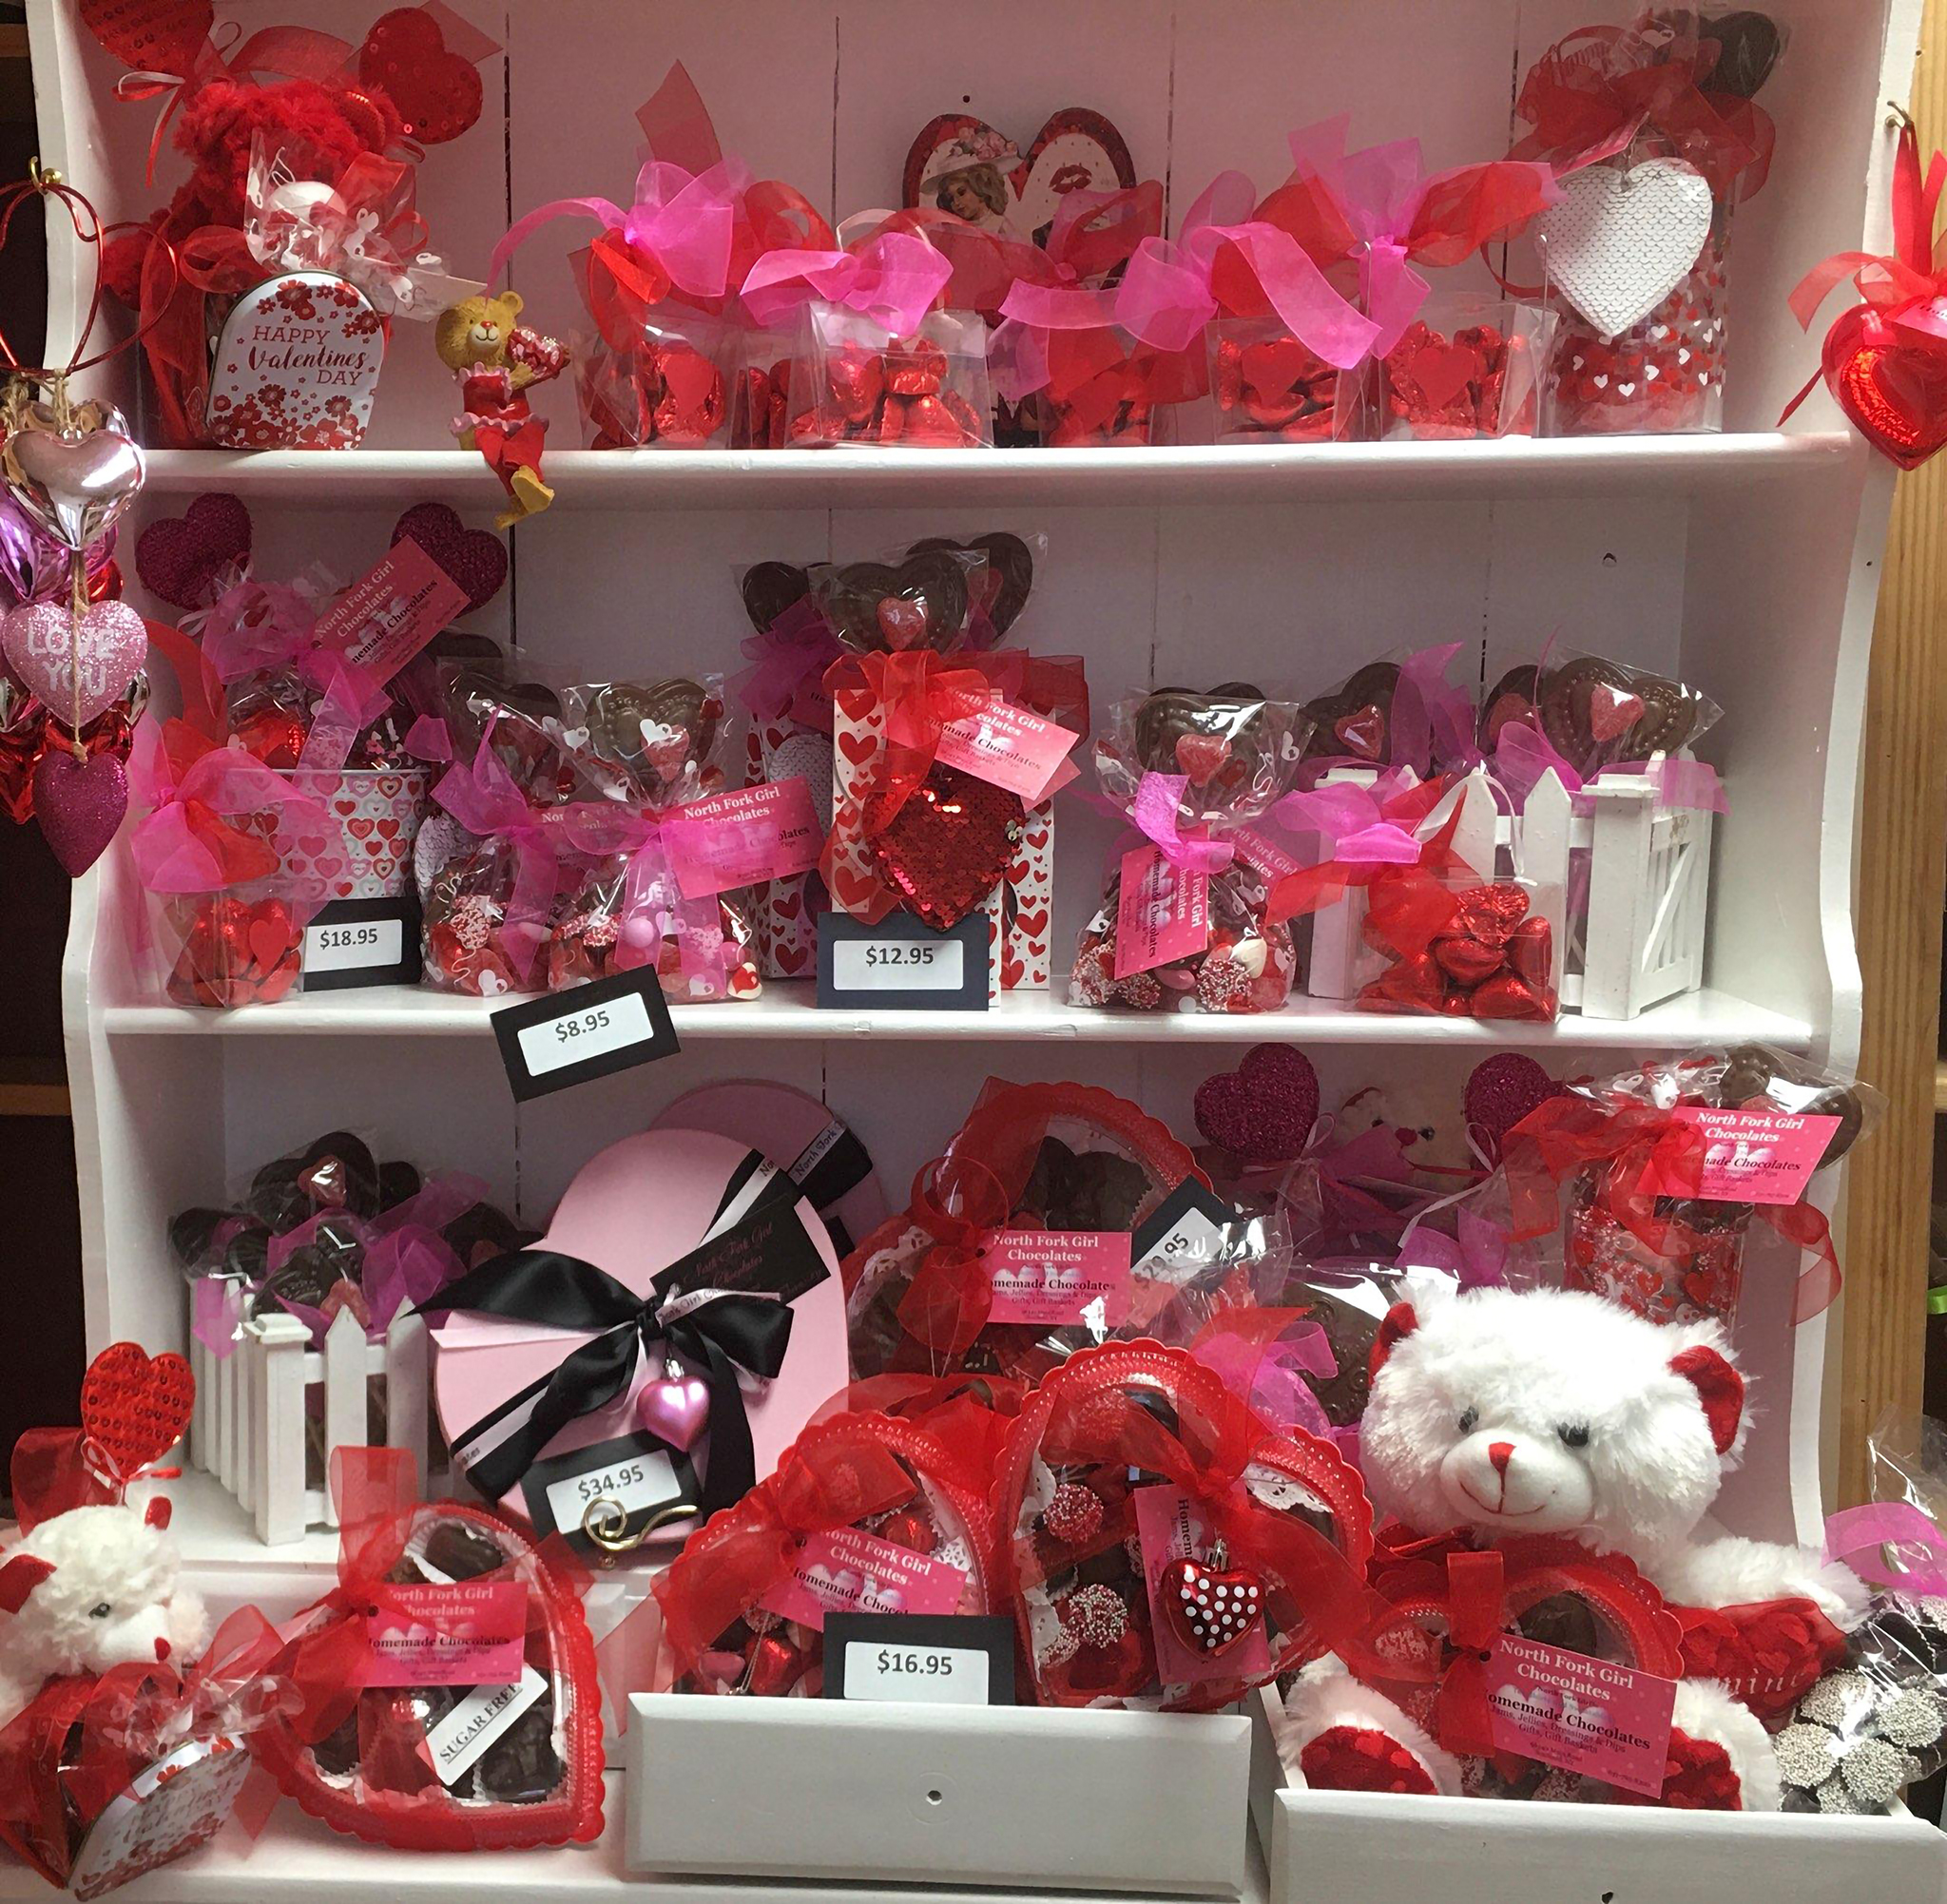 The wide assortment of Valentine's offerings at North Fork Girl Chocolates